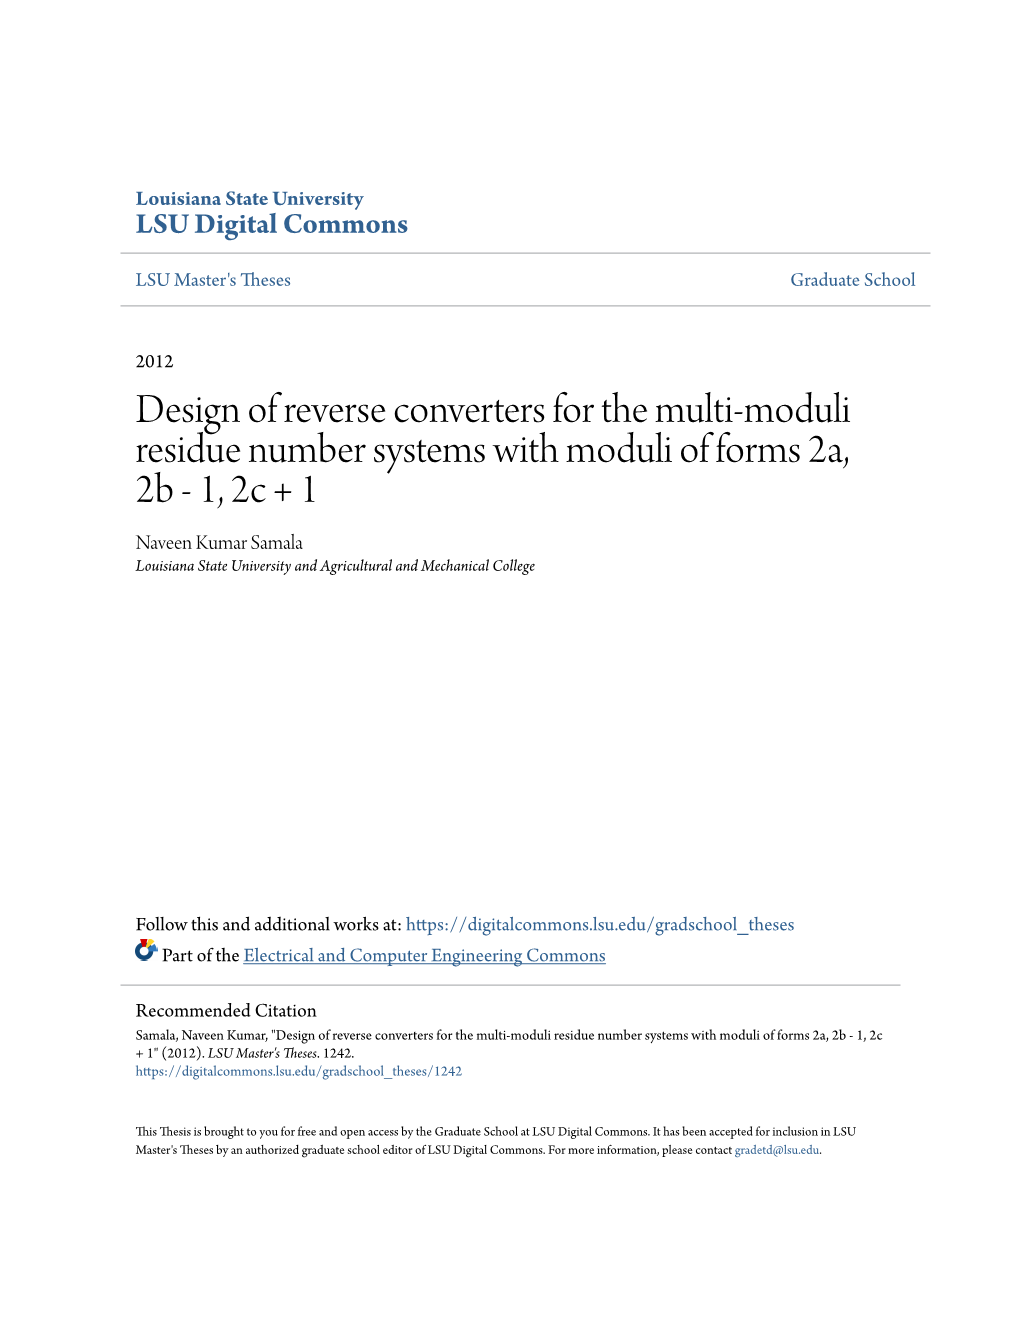 Design of Reverse Converters for the Multi